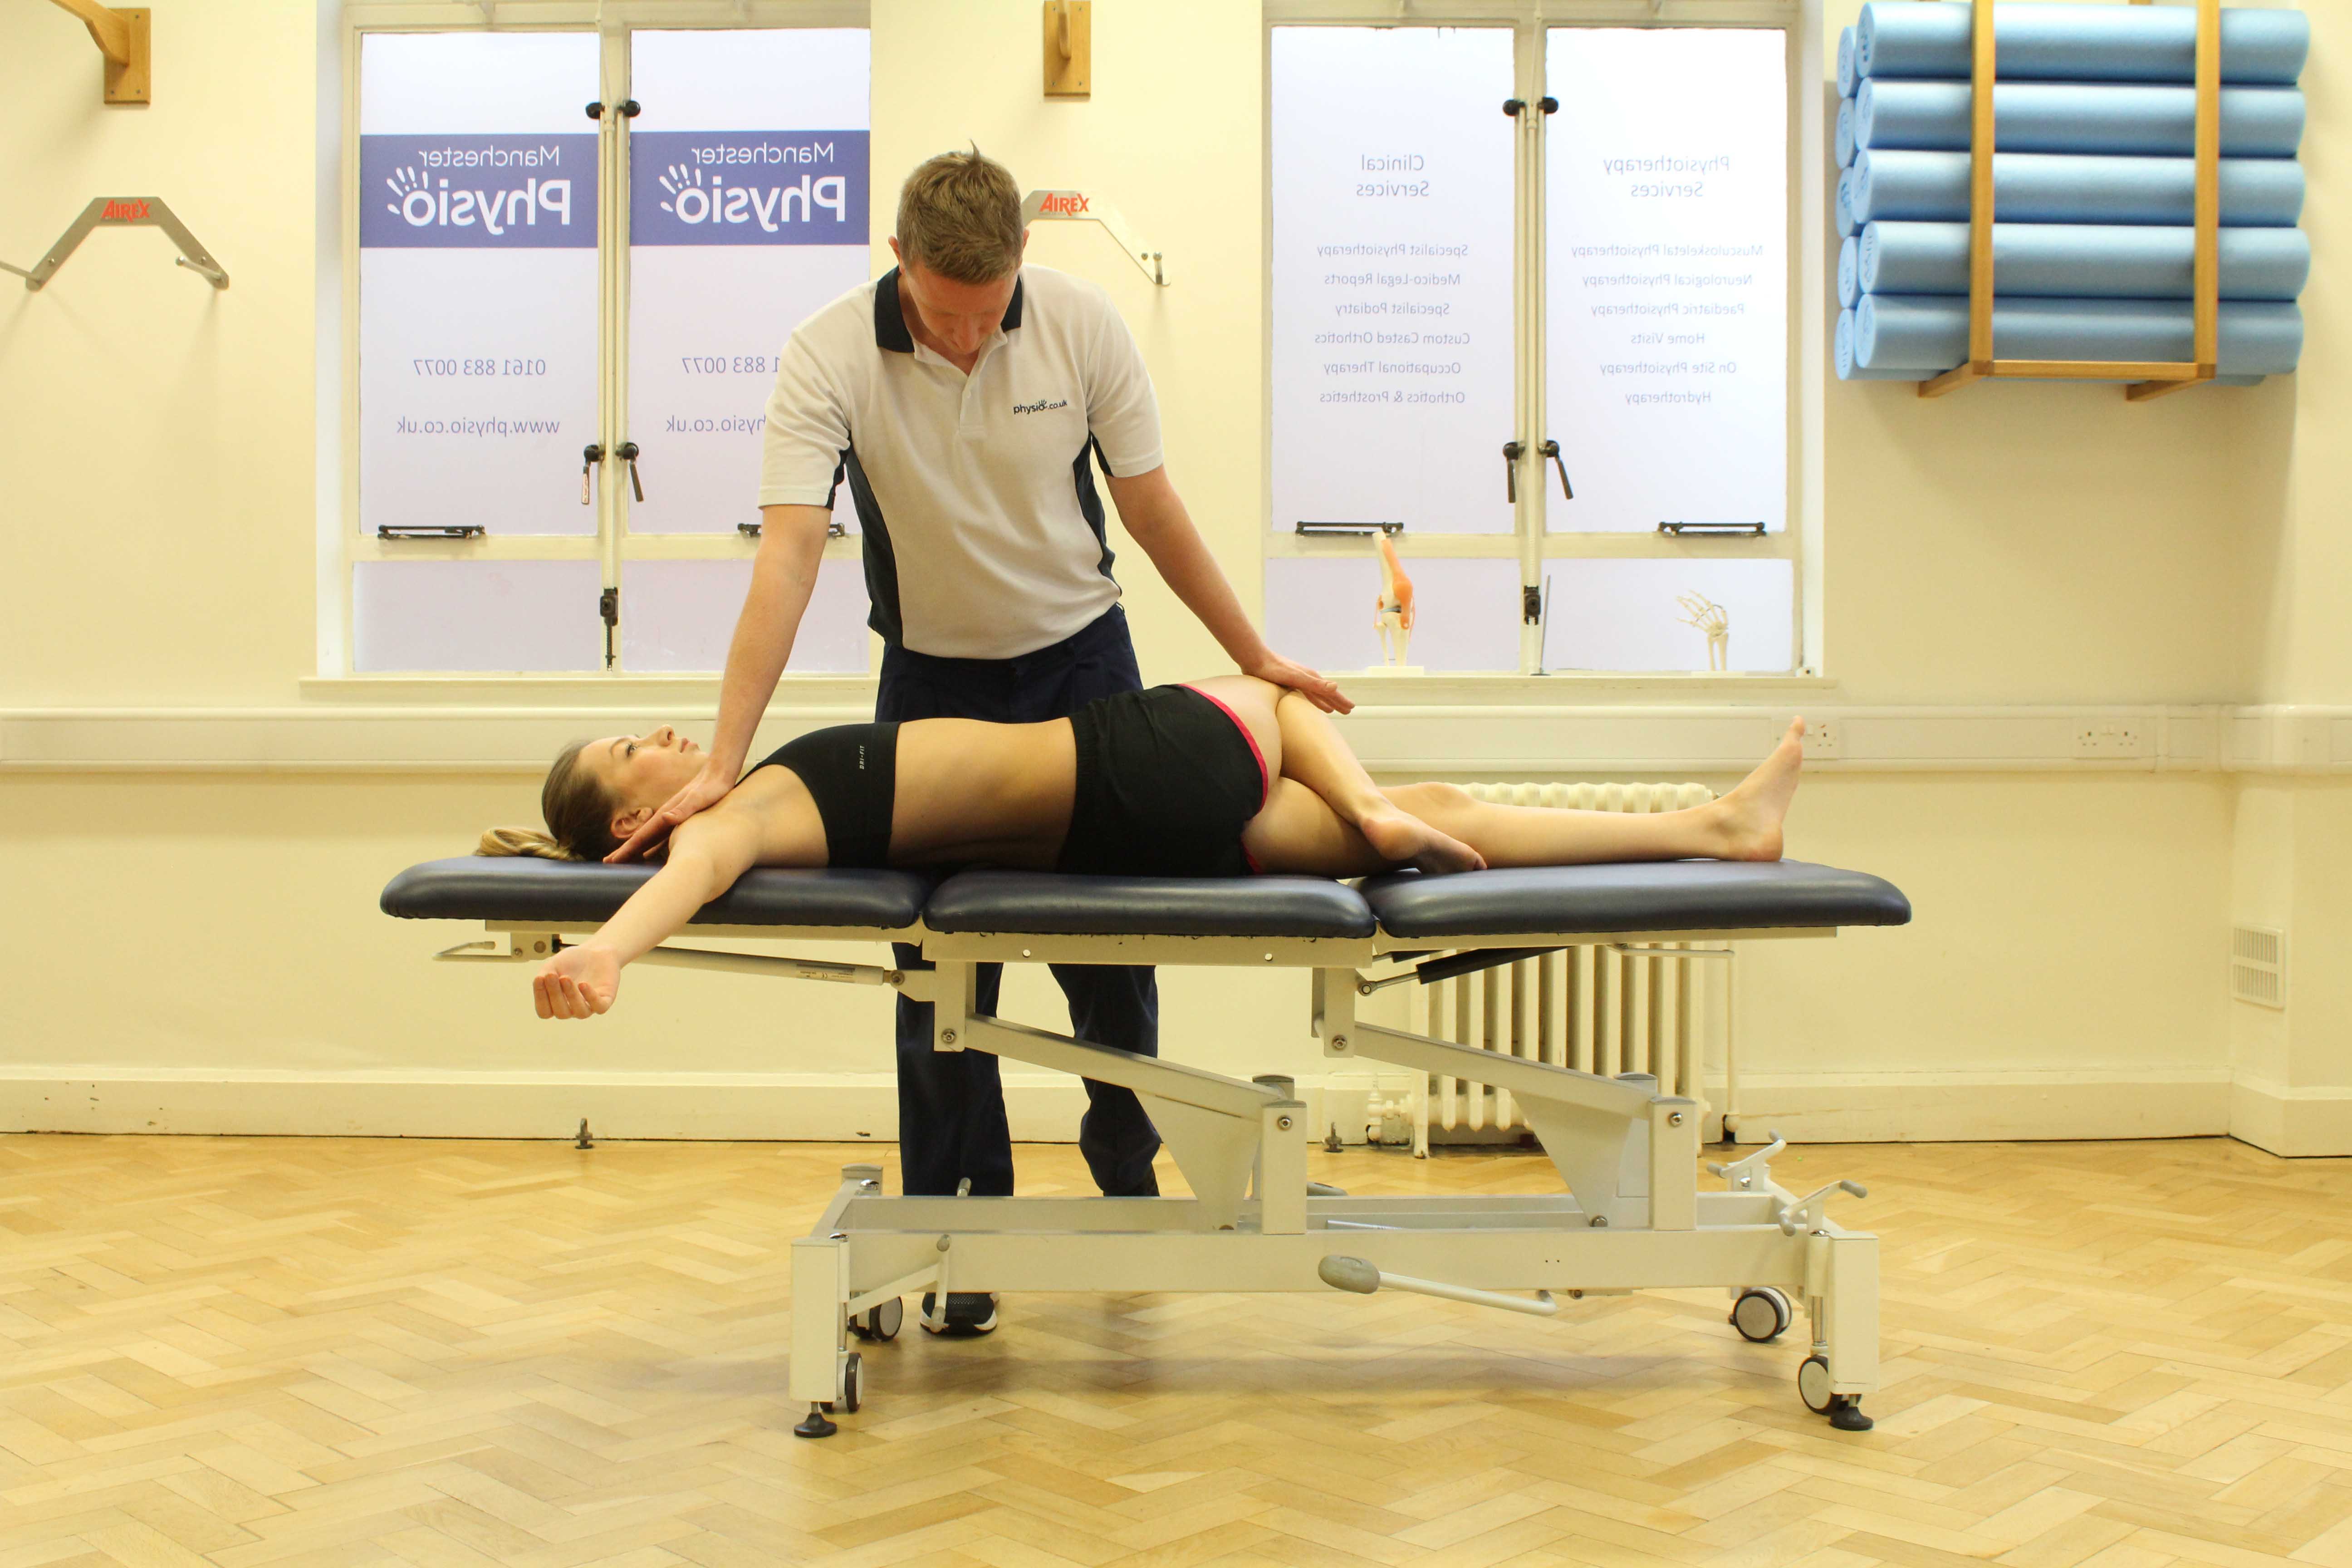 Passive stretches of the lower back muscles and connective tissues